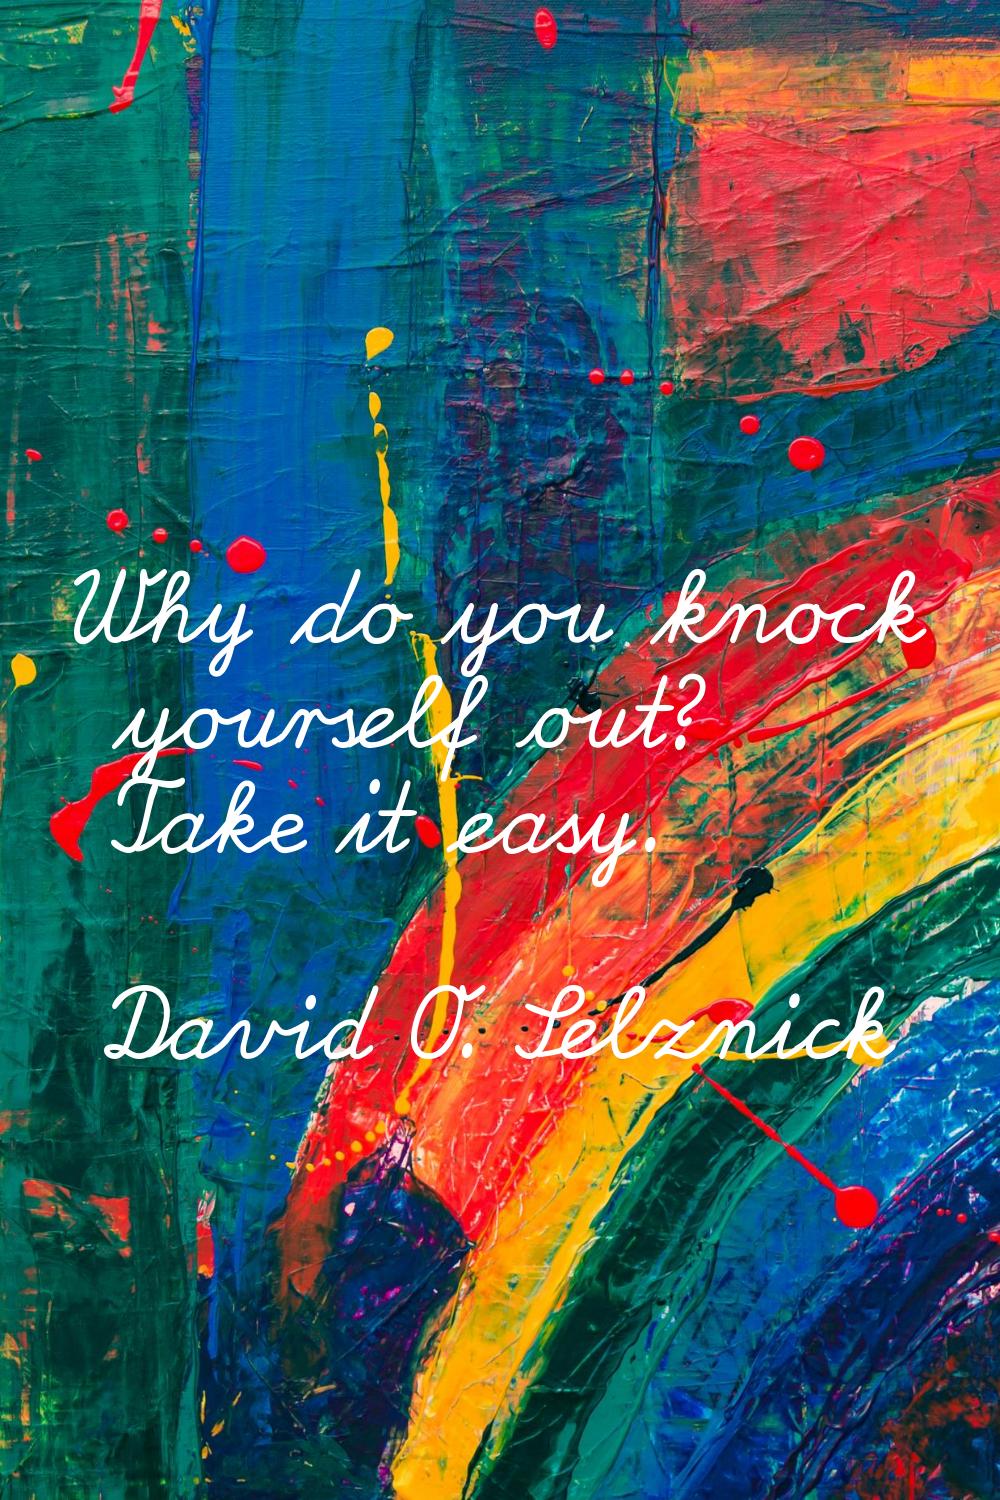 Why do you knock yourself out? Take it easy.